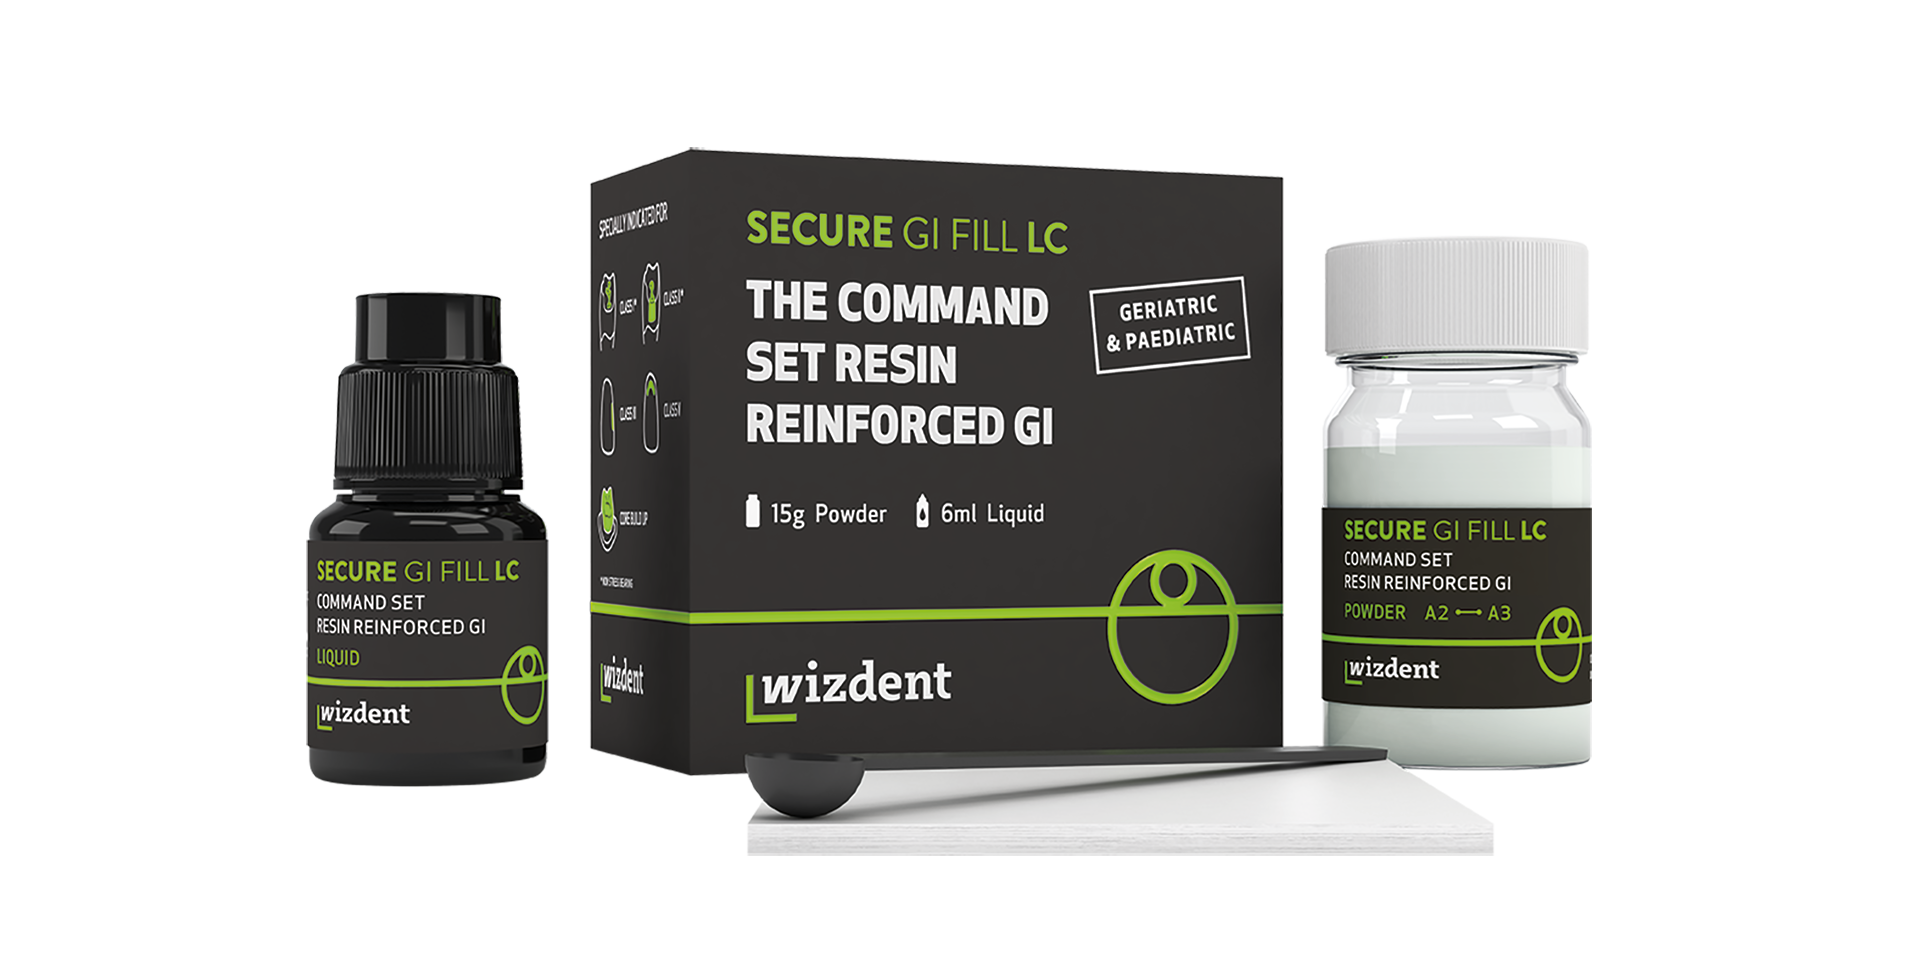 SECURE-GI-FILL-LC-CMYK-NEW